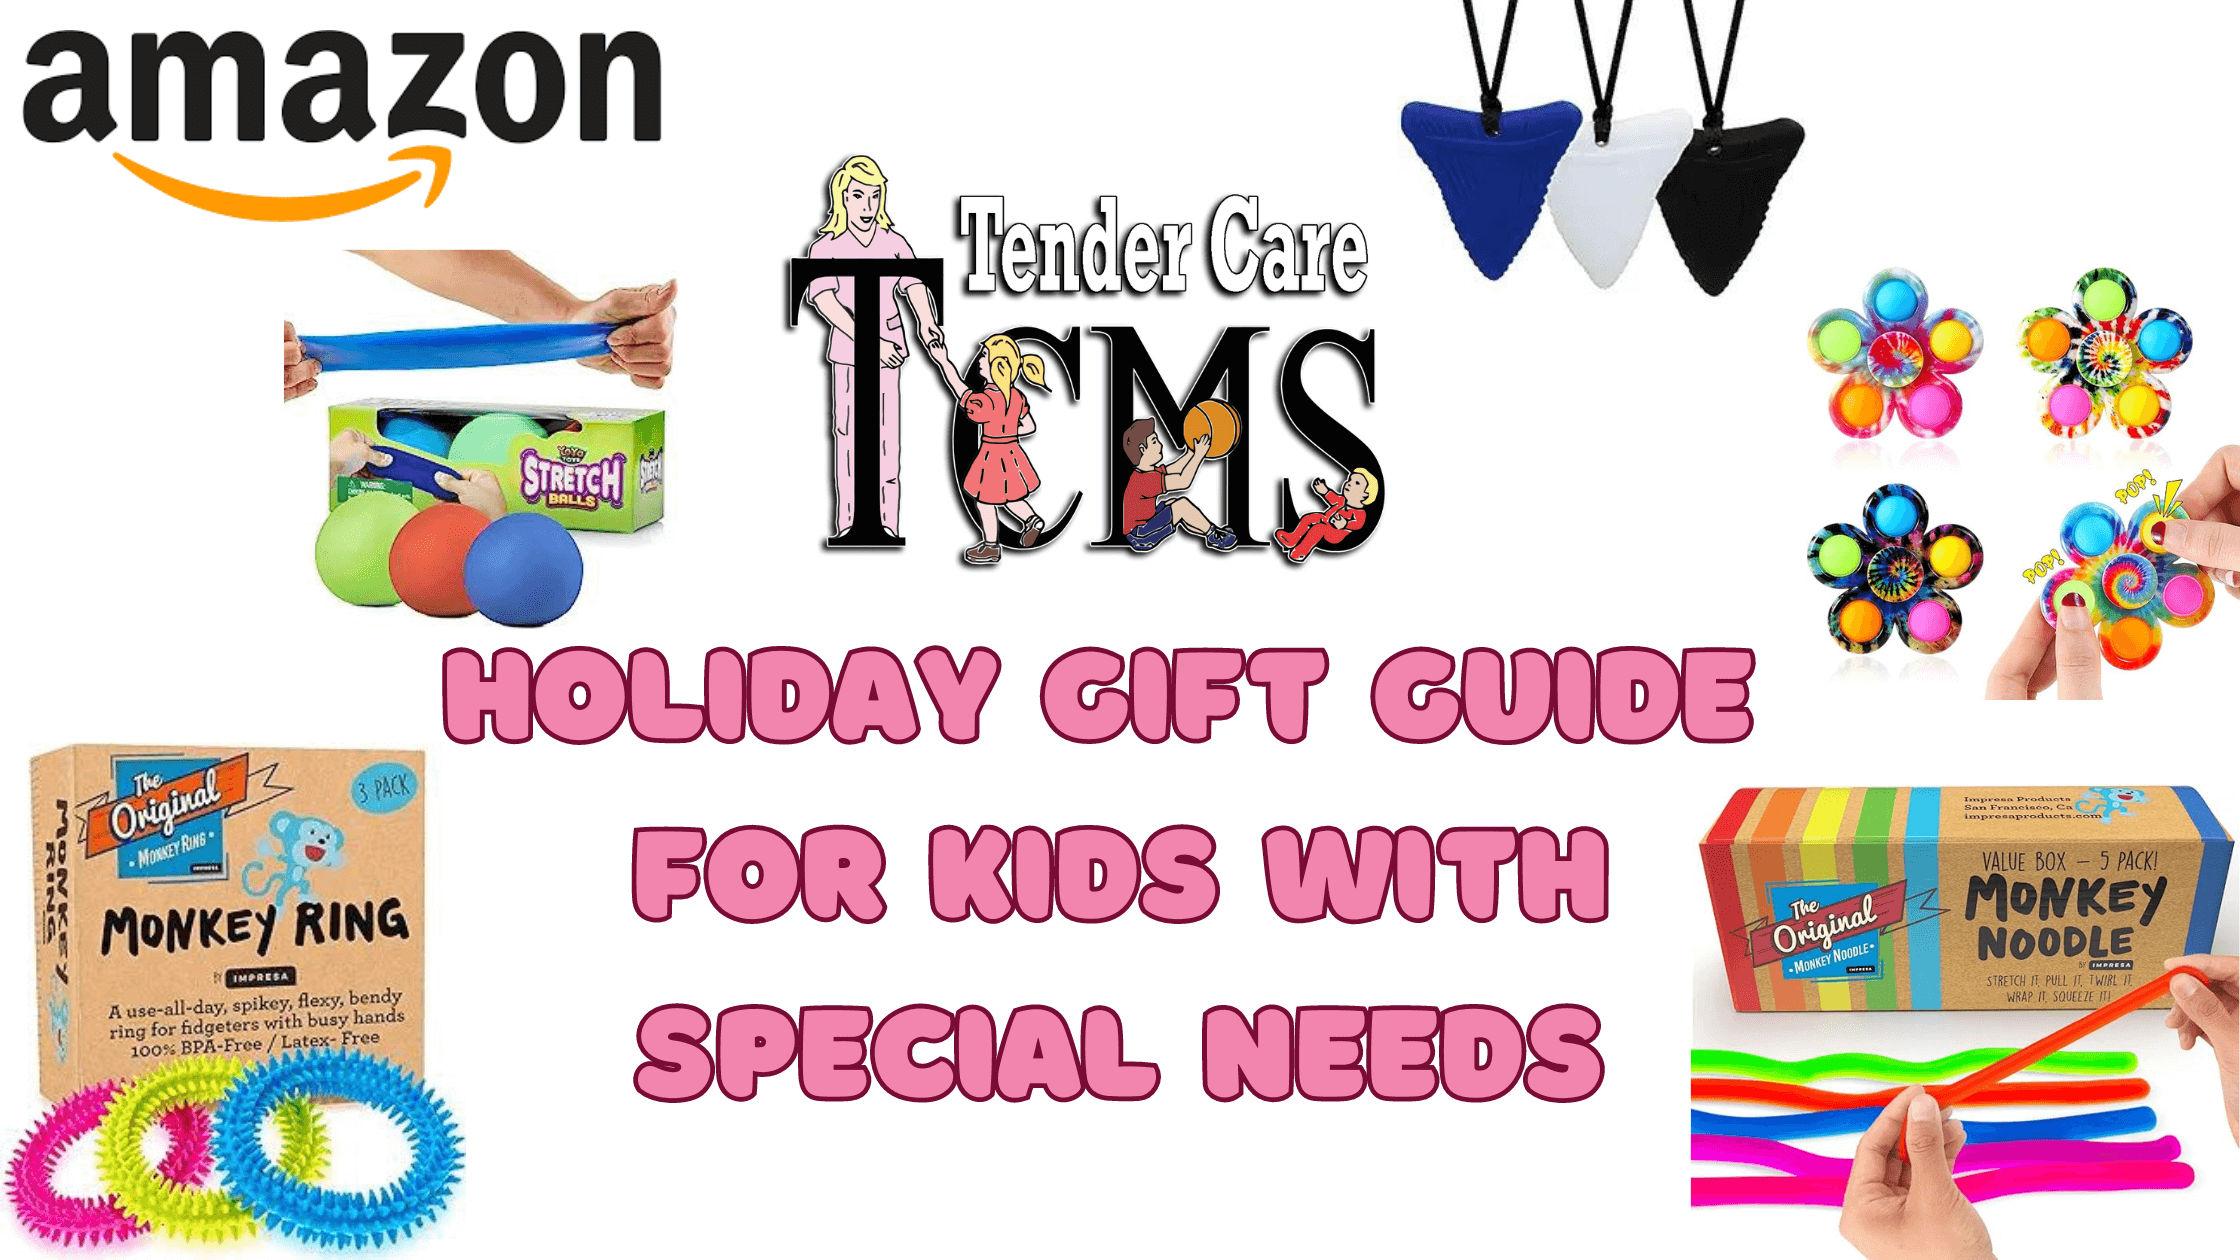 Amazon Holiday Gift Guide